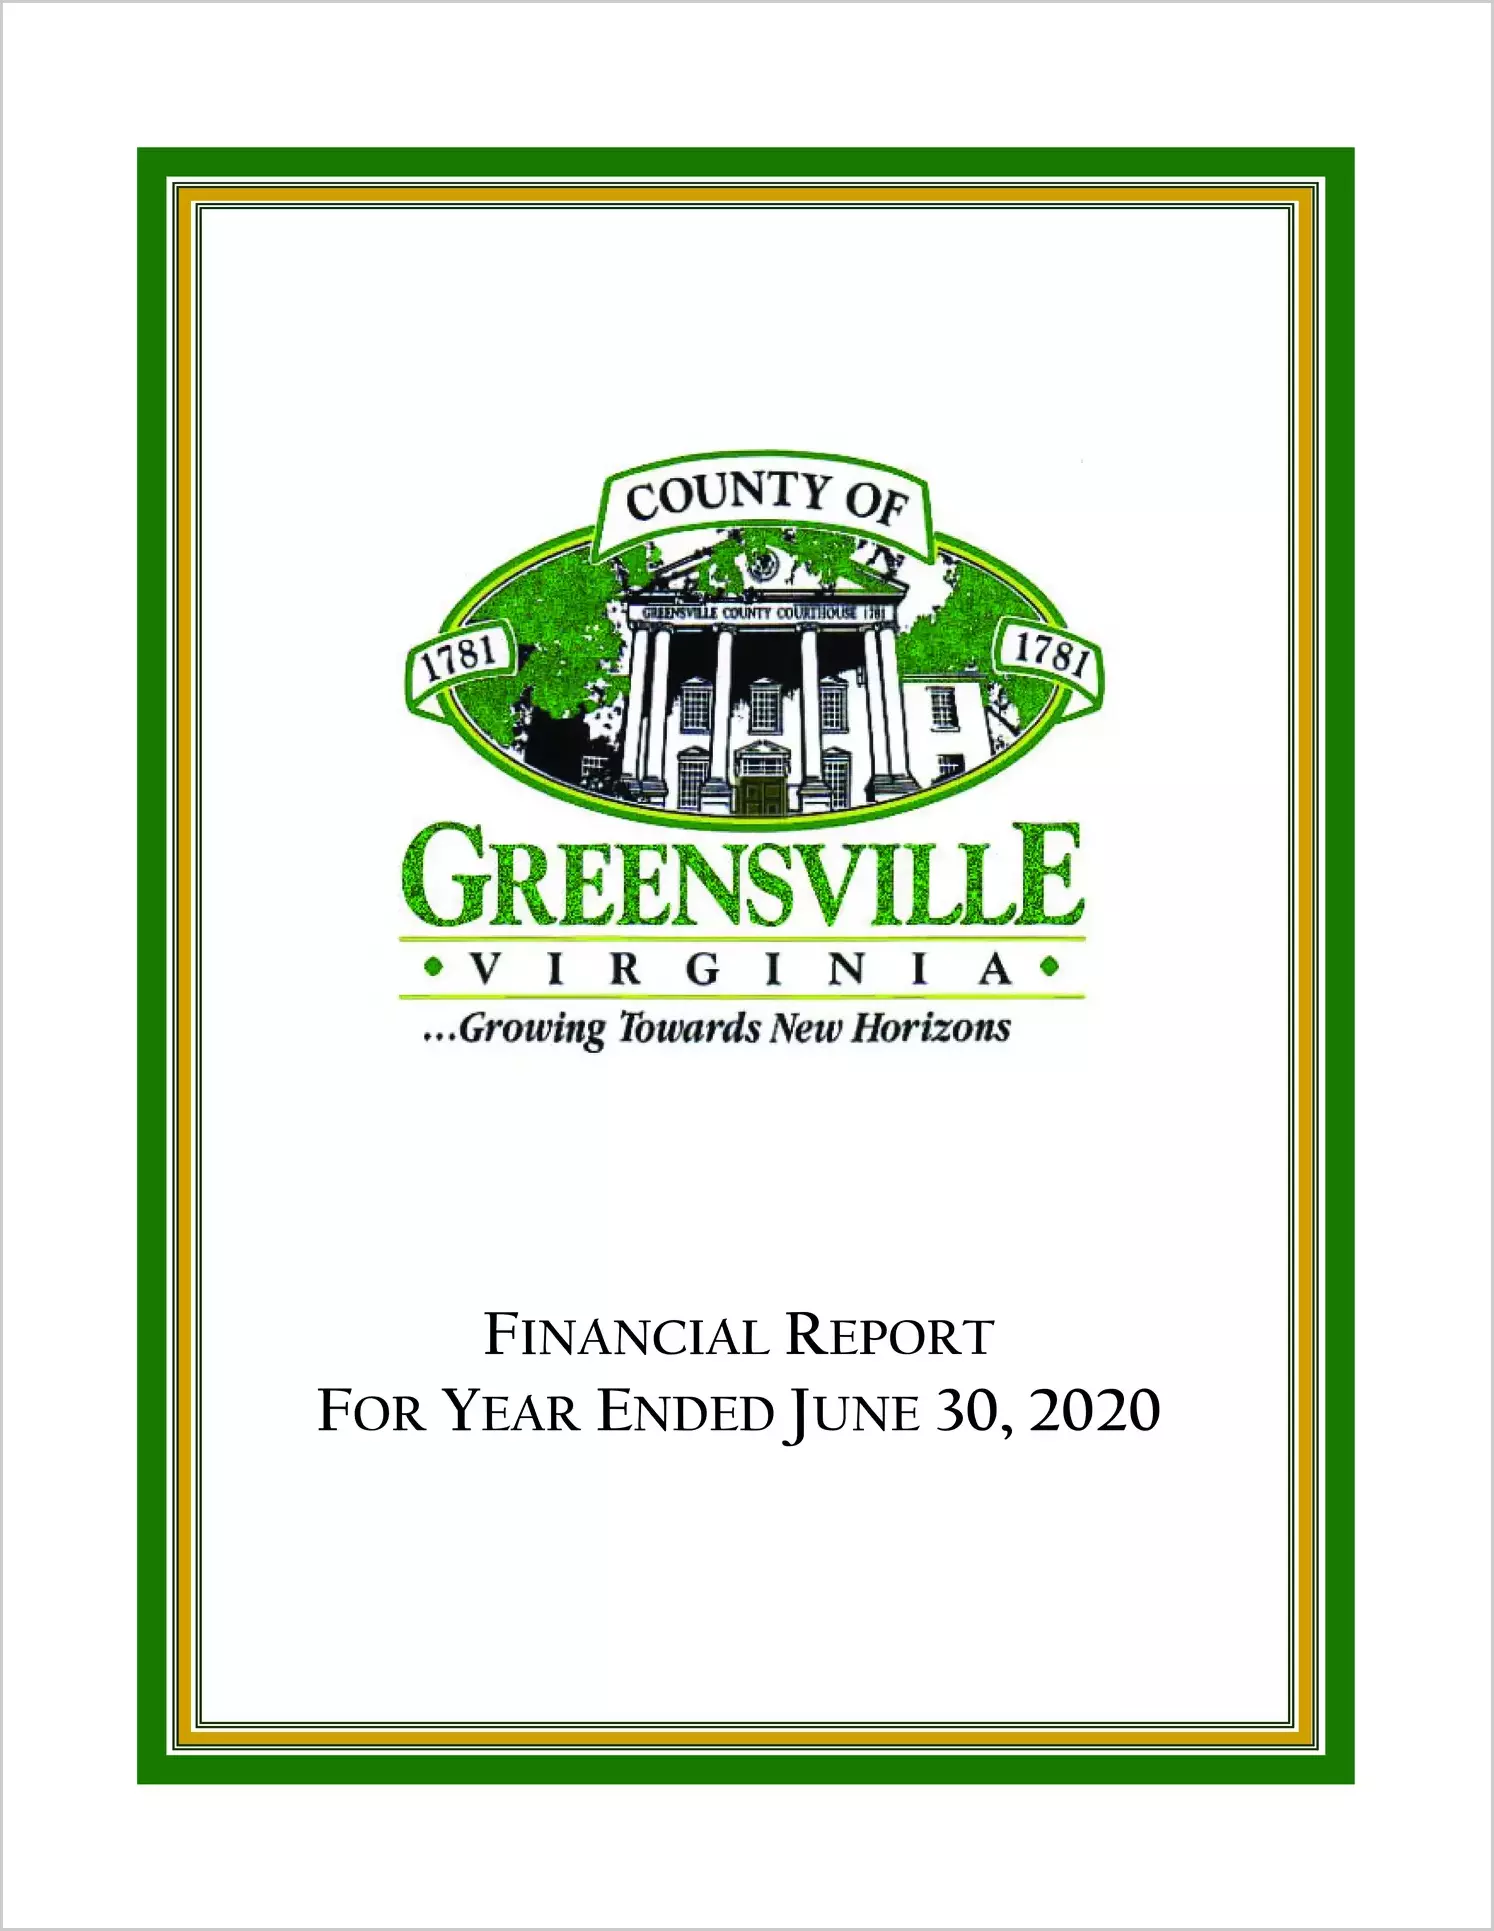 2020 Annual Financial Report for County of Greensville